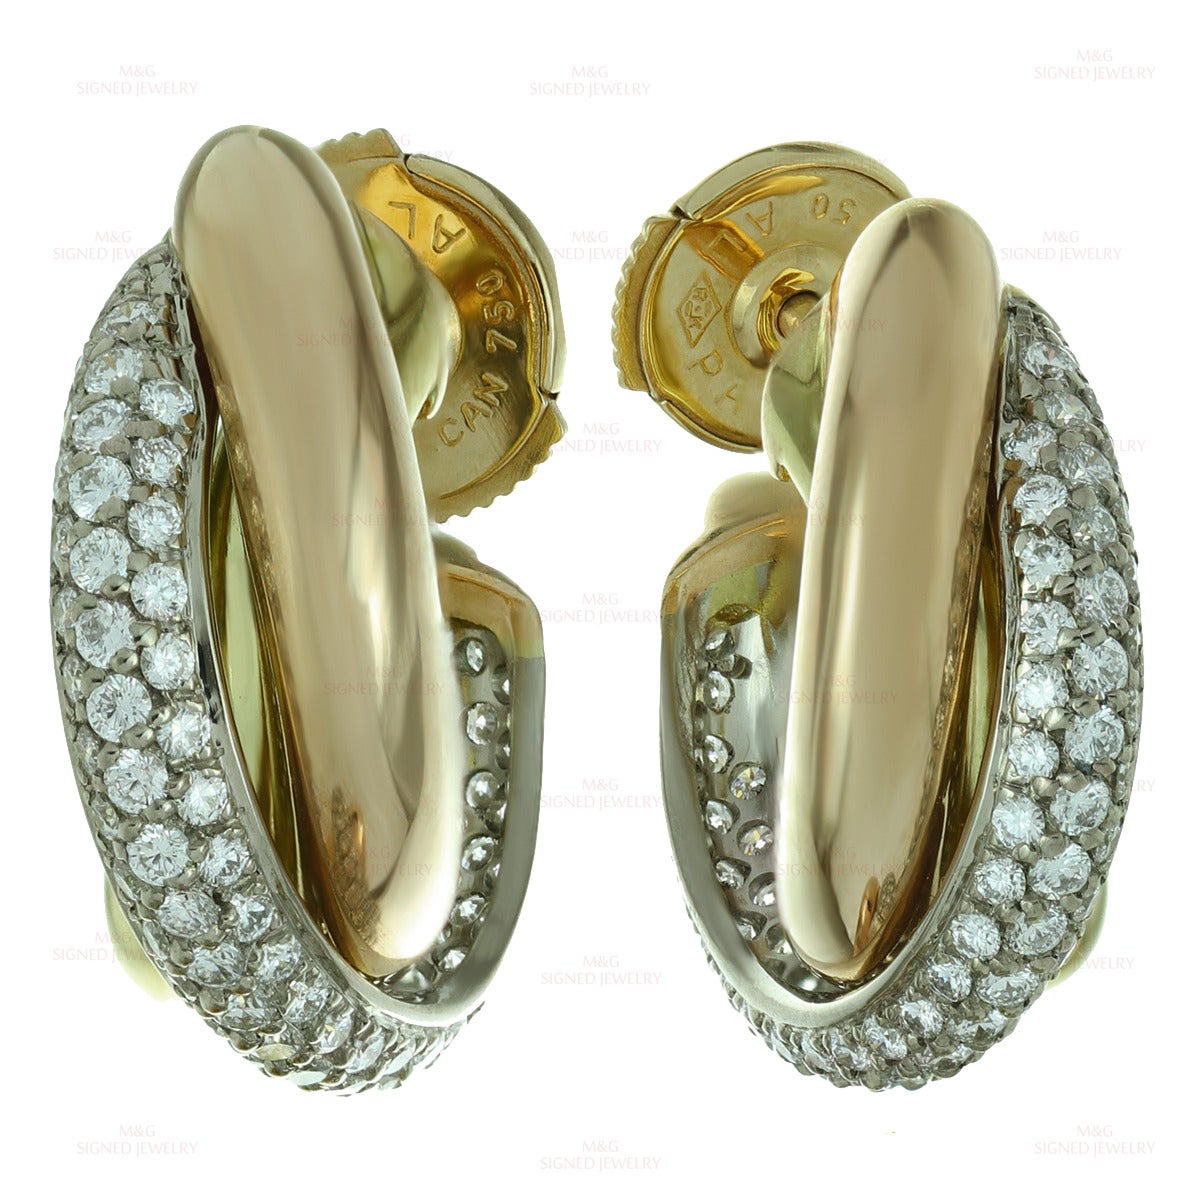 These modern wrap earrings from Cartier's classic Trinity collection feature three intertwined open hoops made in 18k yellow, white and rose gold. The white band is beautifully pave-set with round brilliant-cut E-F VVS2-VS1 diamonds of an estimated